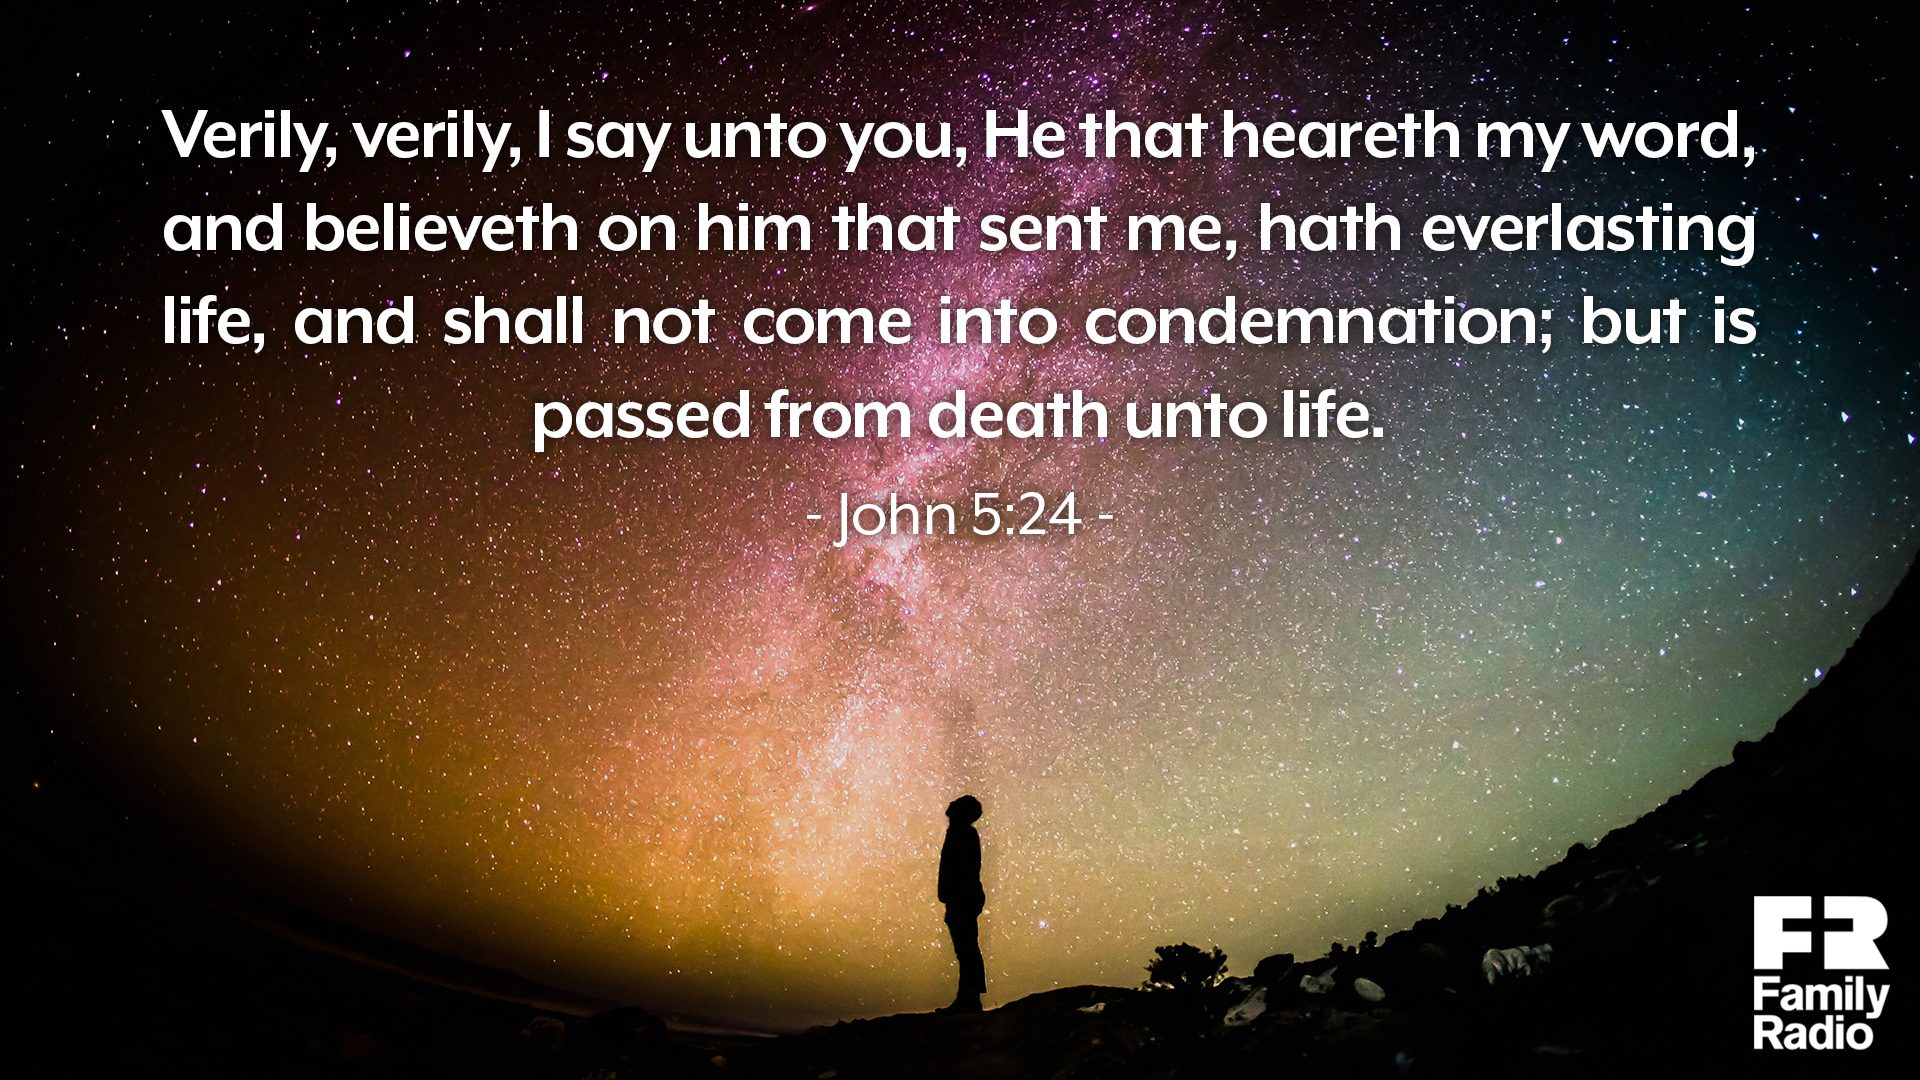 "Verily, verily, I say unto you, He that heareth my word, and believeth on him that sent me, hath everlasting life, and shall not come into condemnation; but is passed from death unto life."